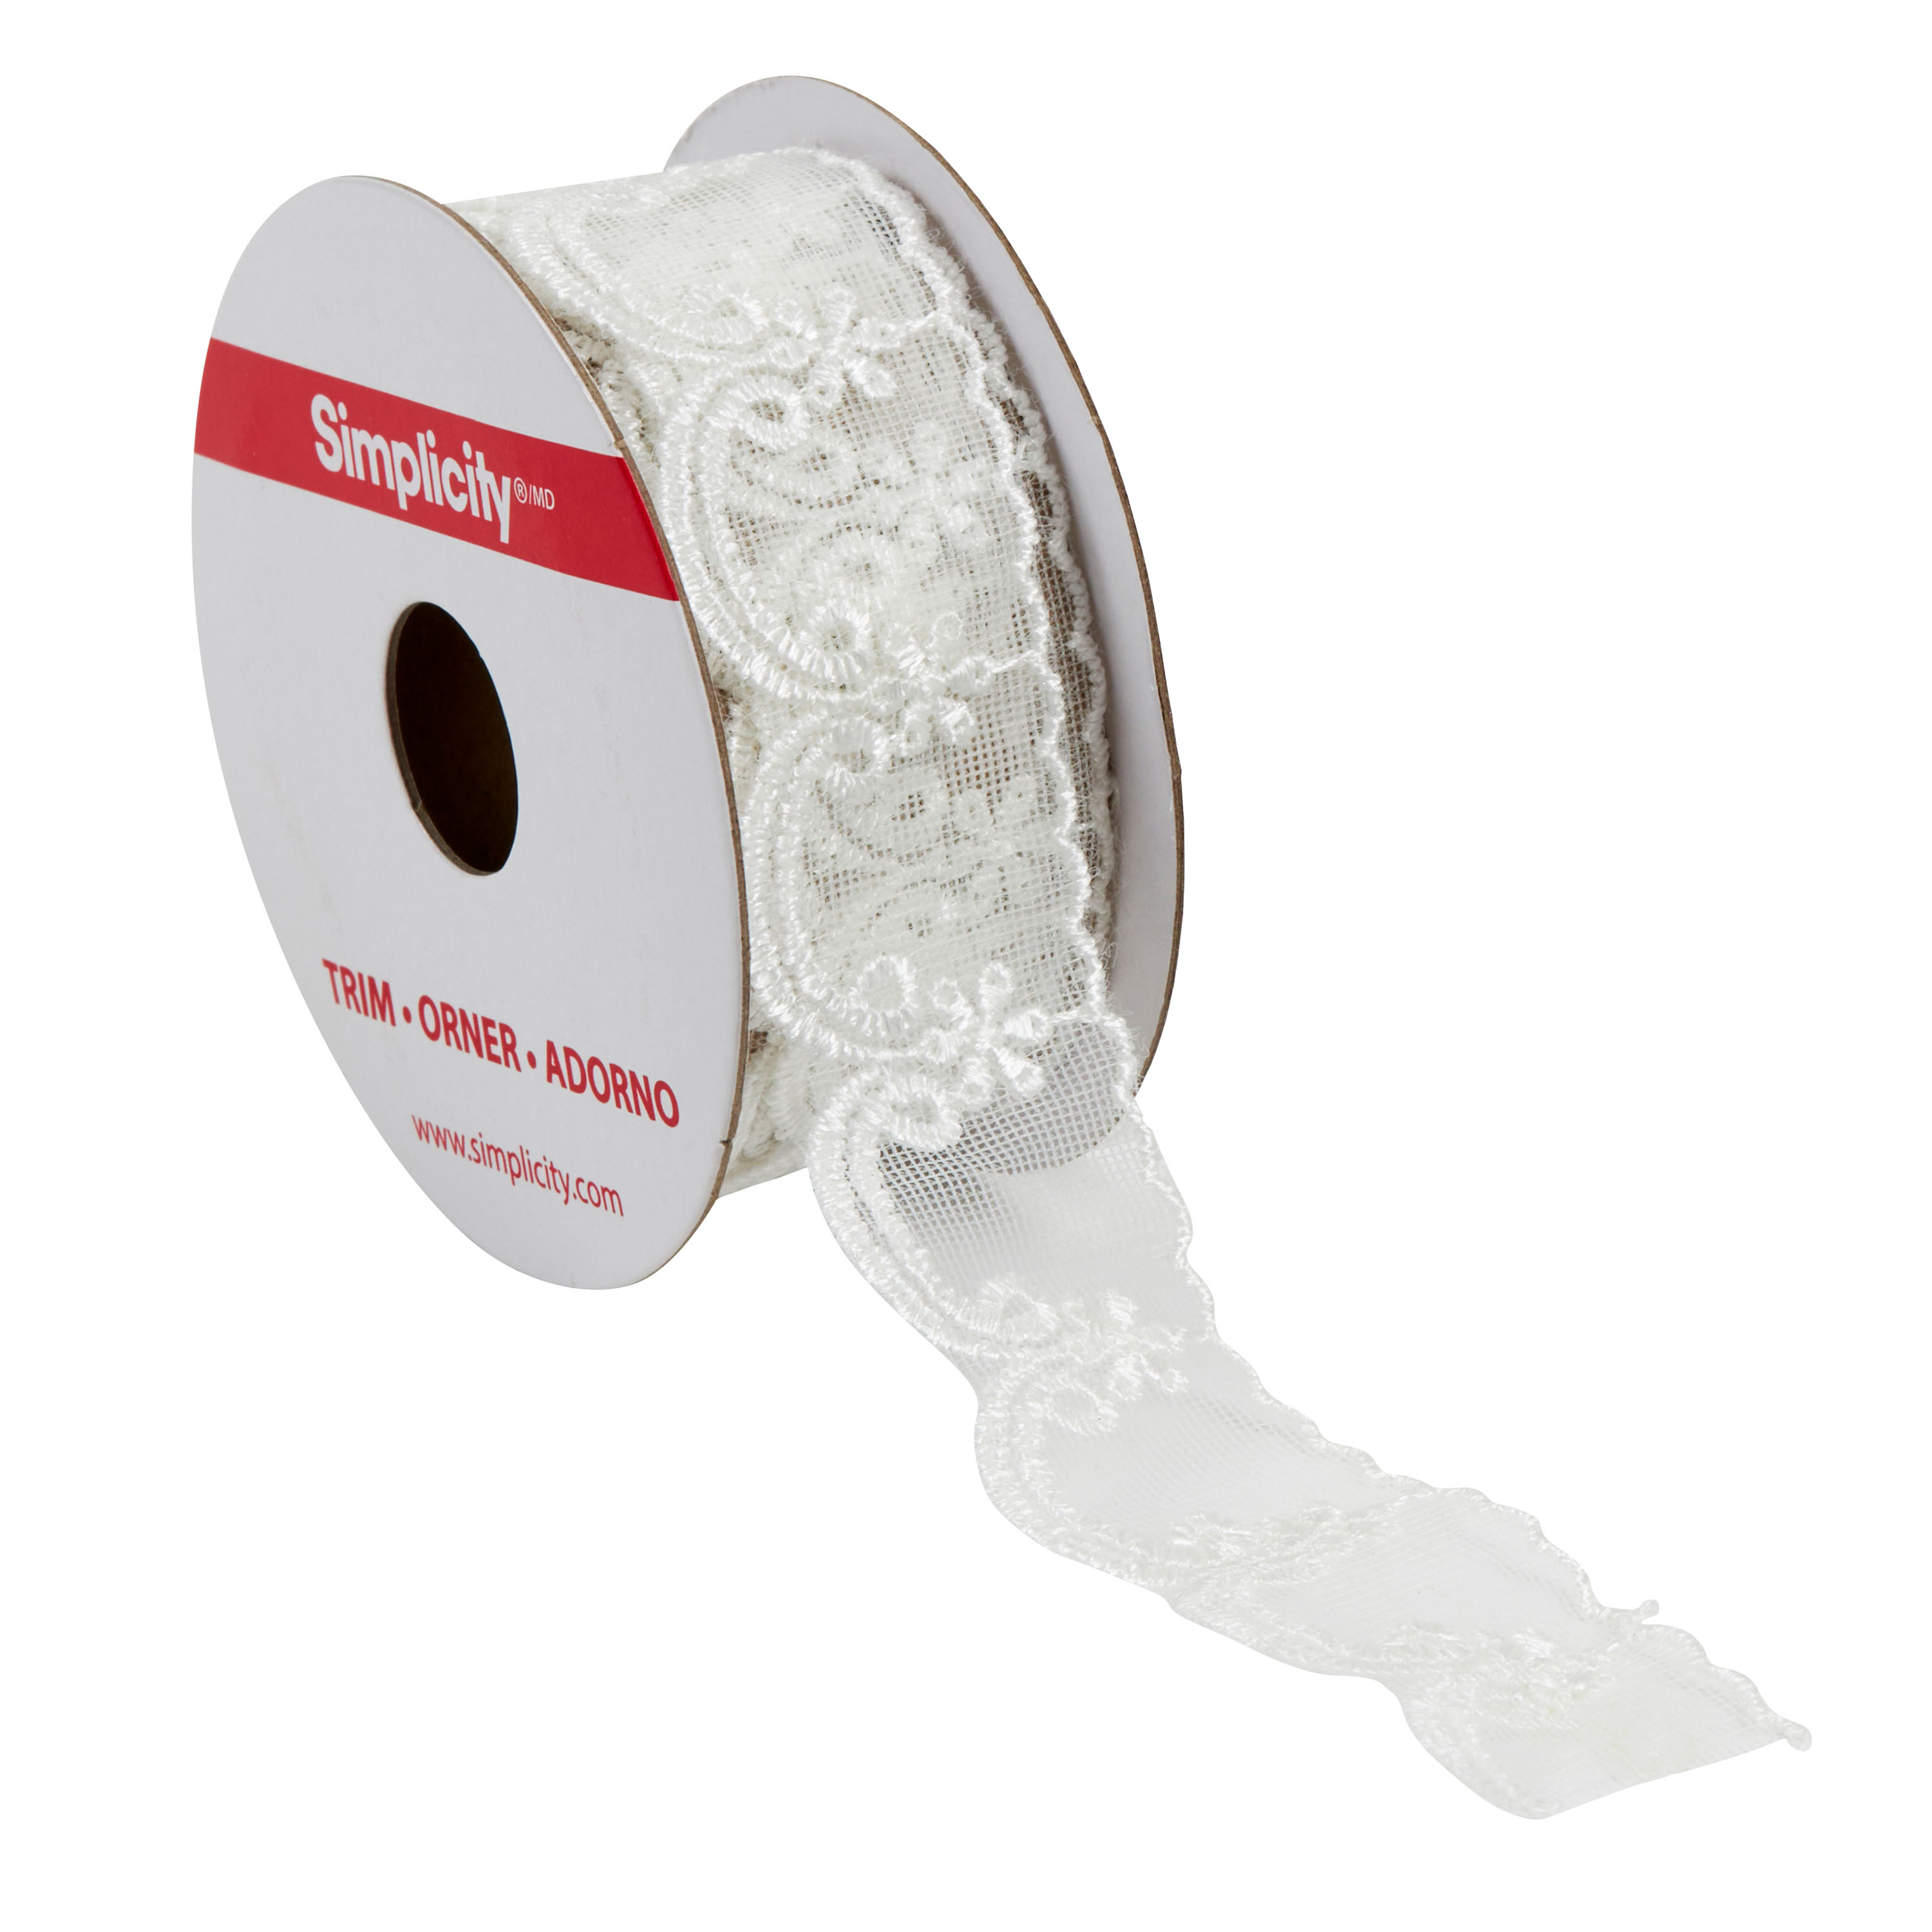 Simplicity Trim, White 1 1/4 inch Embroidered Lace Mesh with